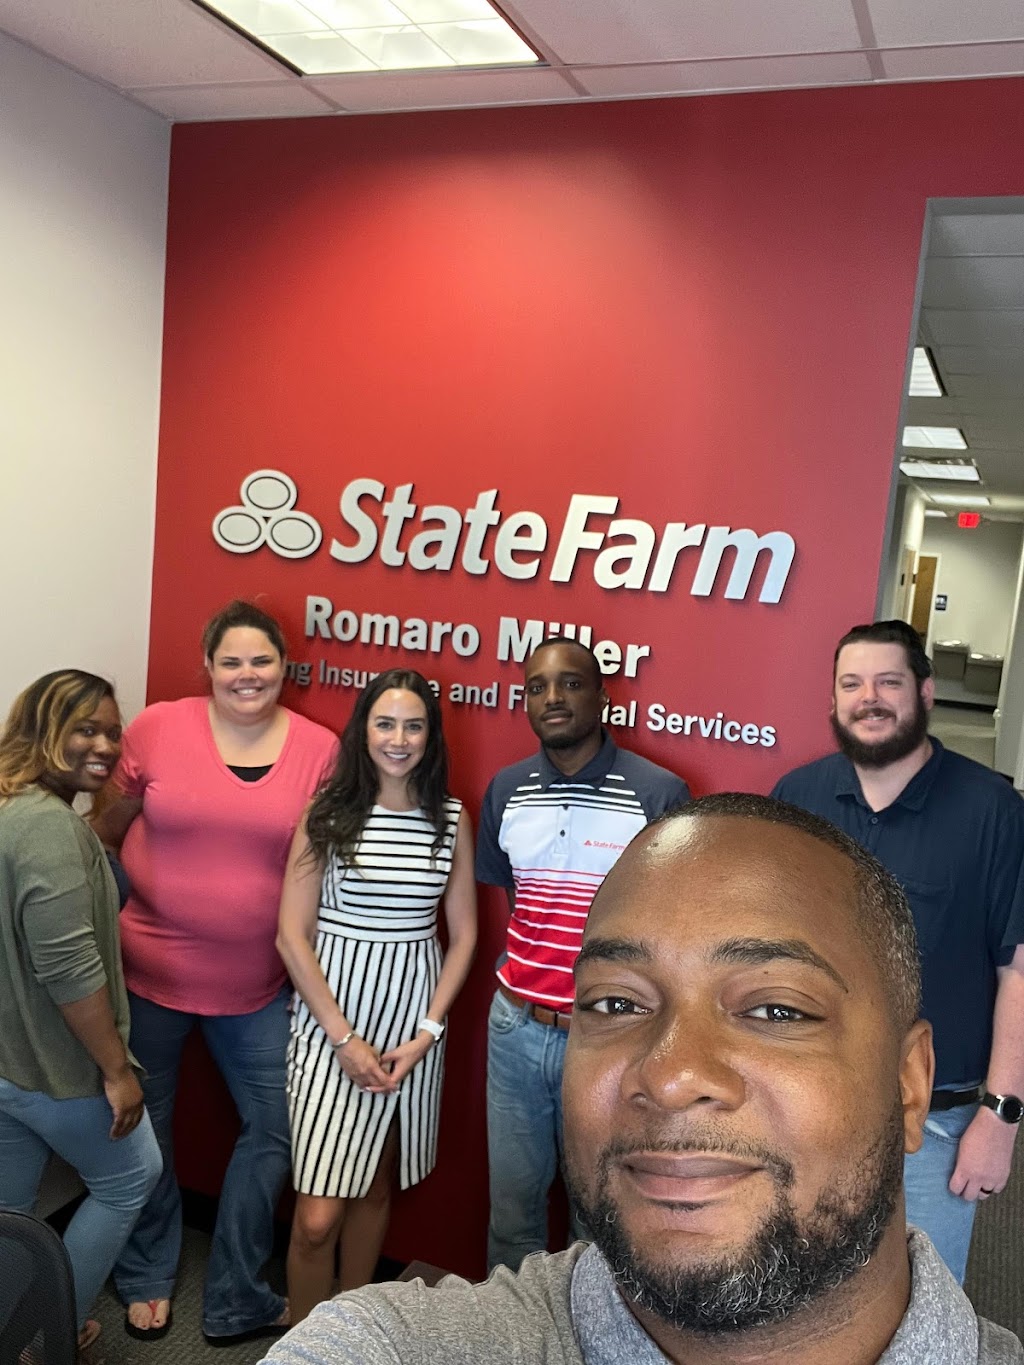 Romaro Miller - State Farm Insurance Agent | 7164 Hacks Cross Rd Suite 119, Olive Branch, MS 38654, USA | Phone: (662) 893-1212